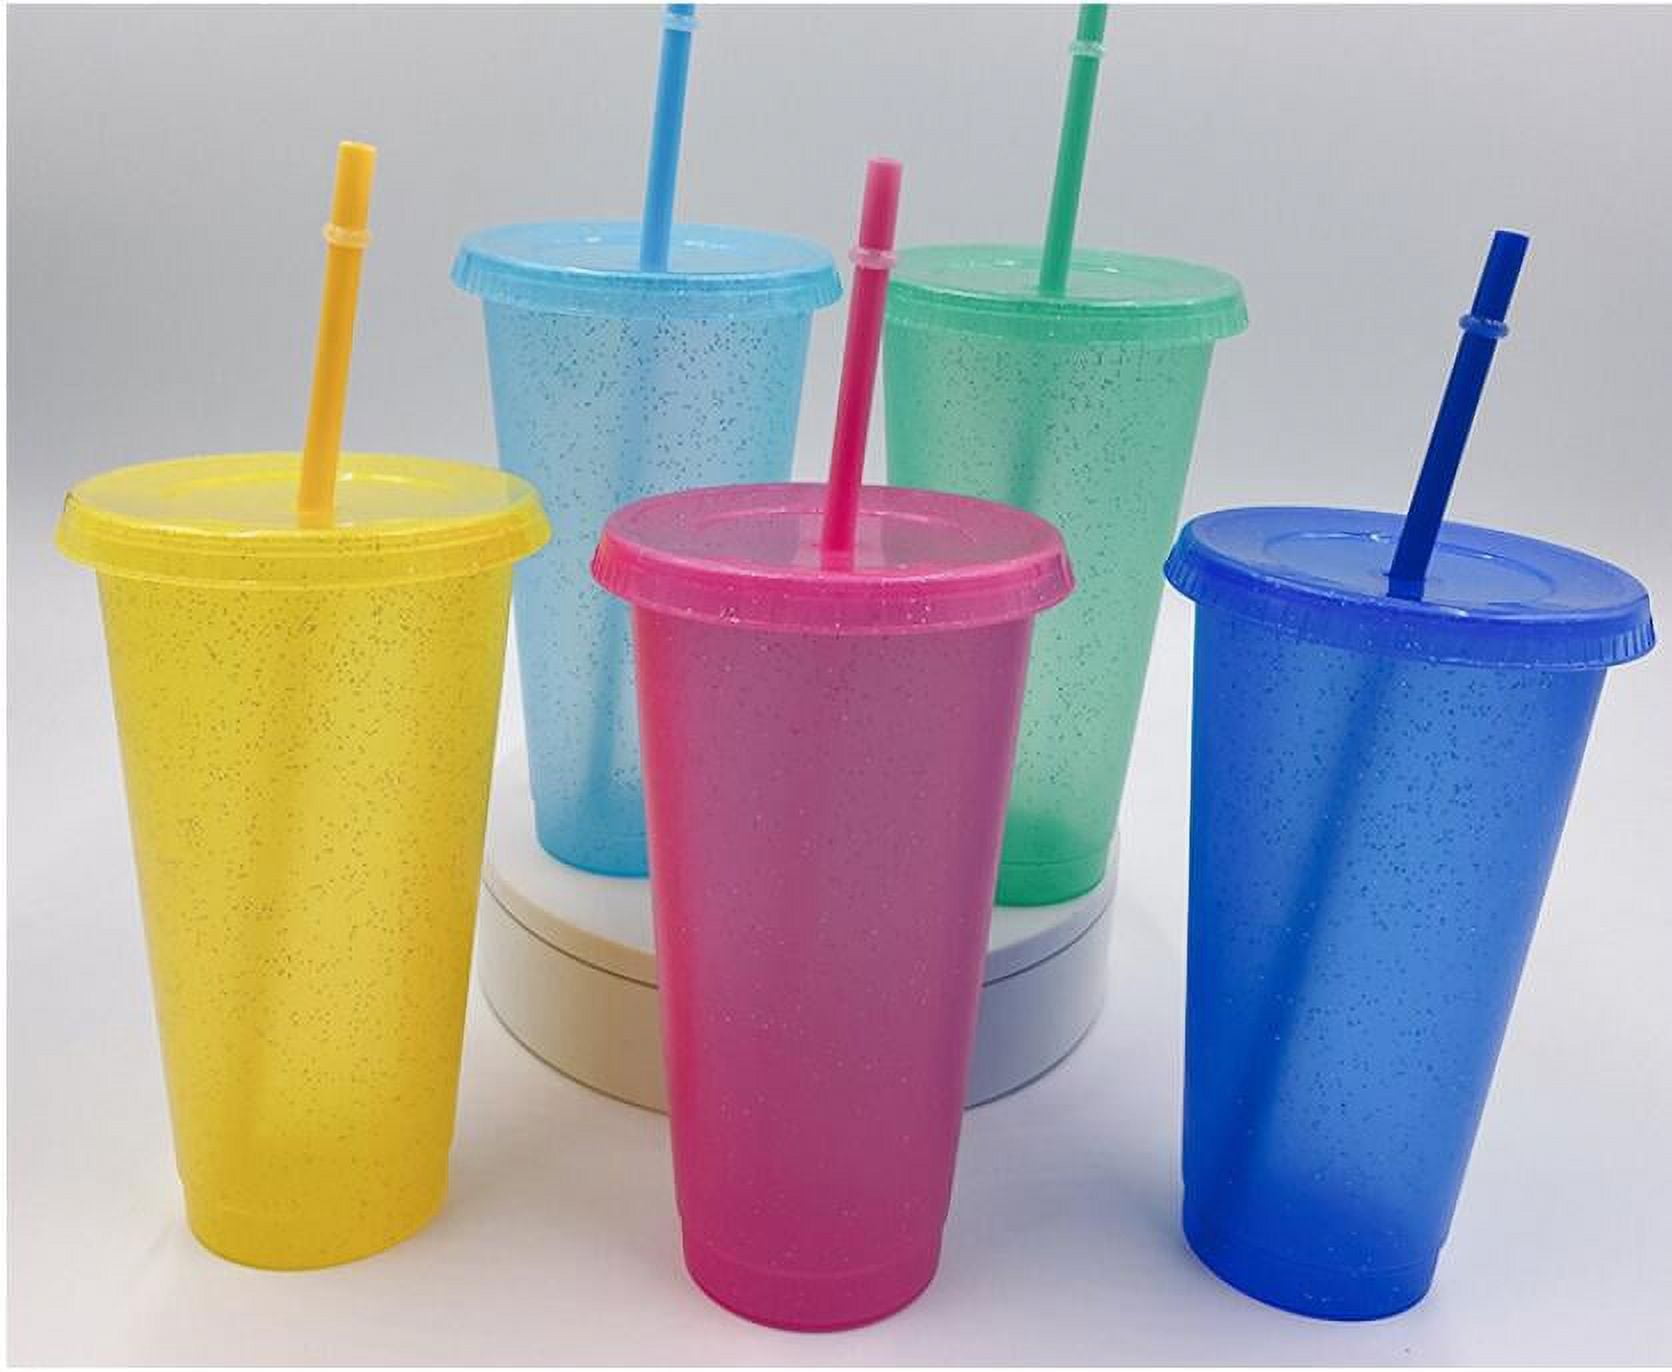 18 Packs Cups with Lids and Straws Glitter Reusable Cups in Vivid Colors 24  oz Plastic Tumbler with …See more 18 Packs Cups with Lids and Straws